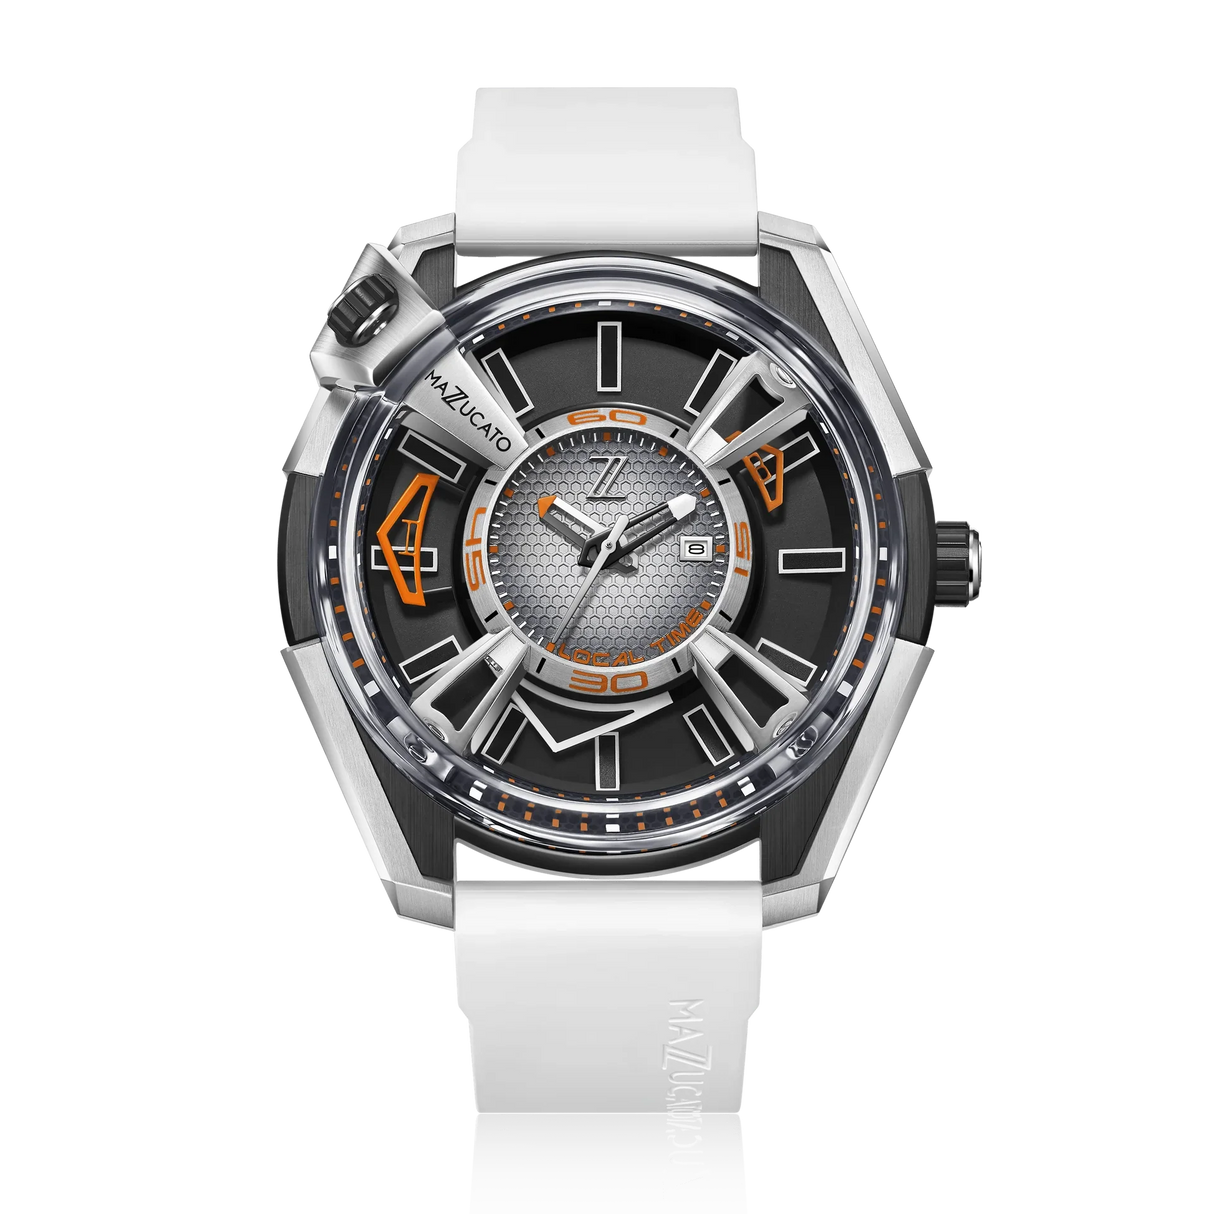 Mazzucato Watch Automatic LAX Limited Edition Dual Time 04-WH